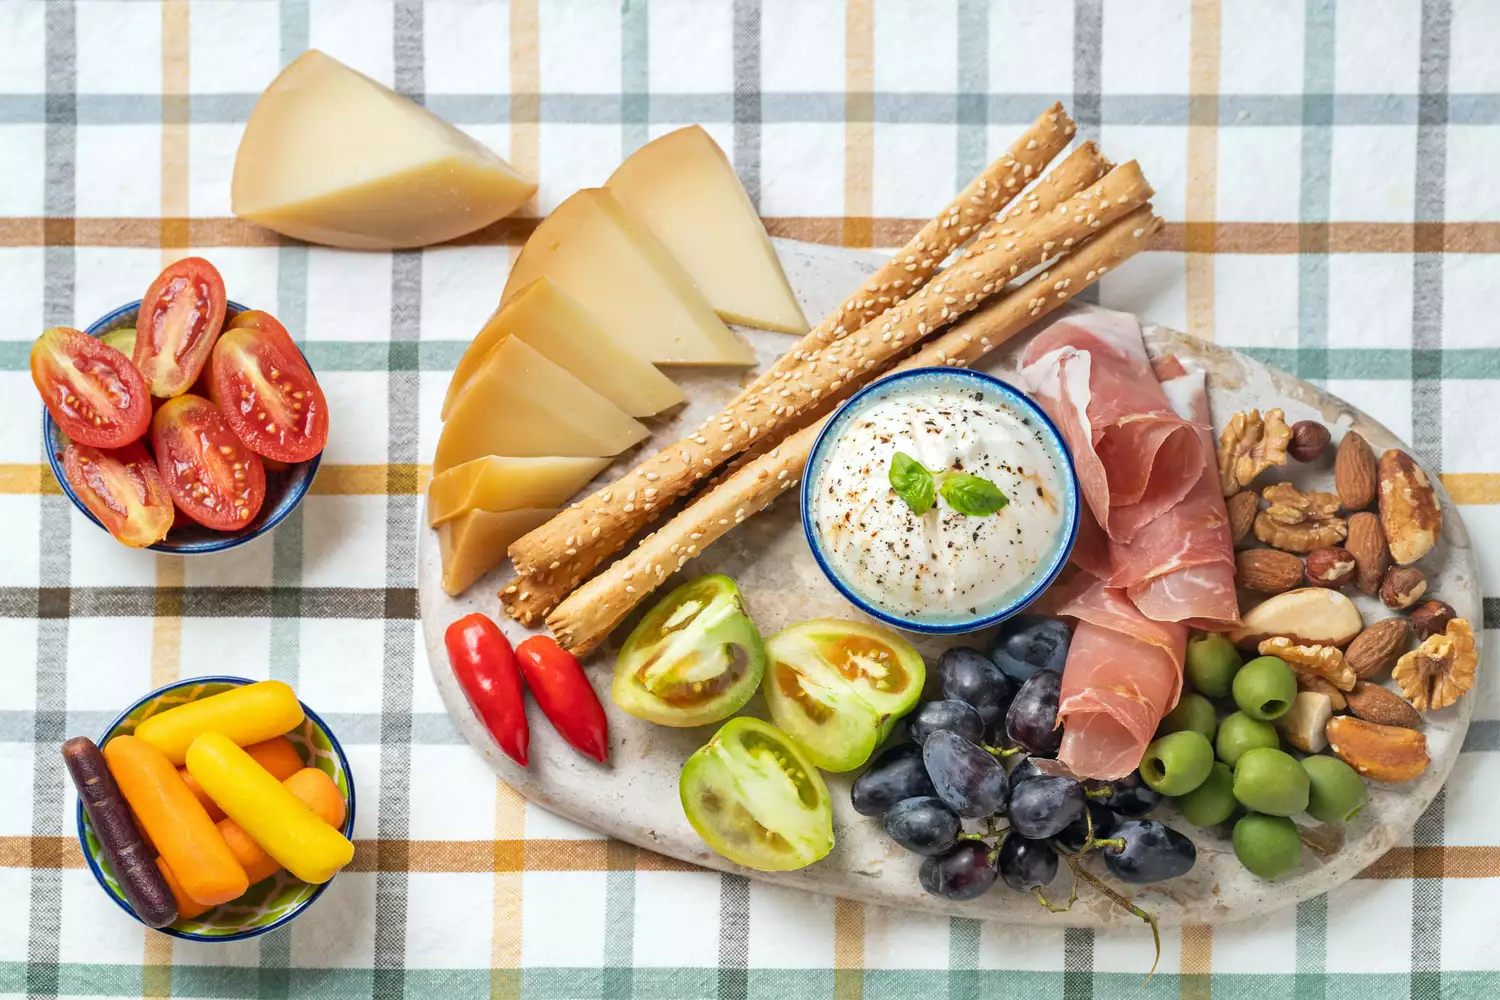 How to Turn a Charcuterie Board Into a Healthy Dinner, According to a Registered Dietitian